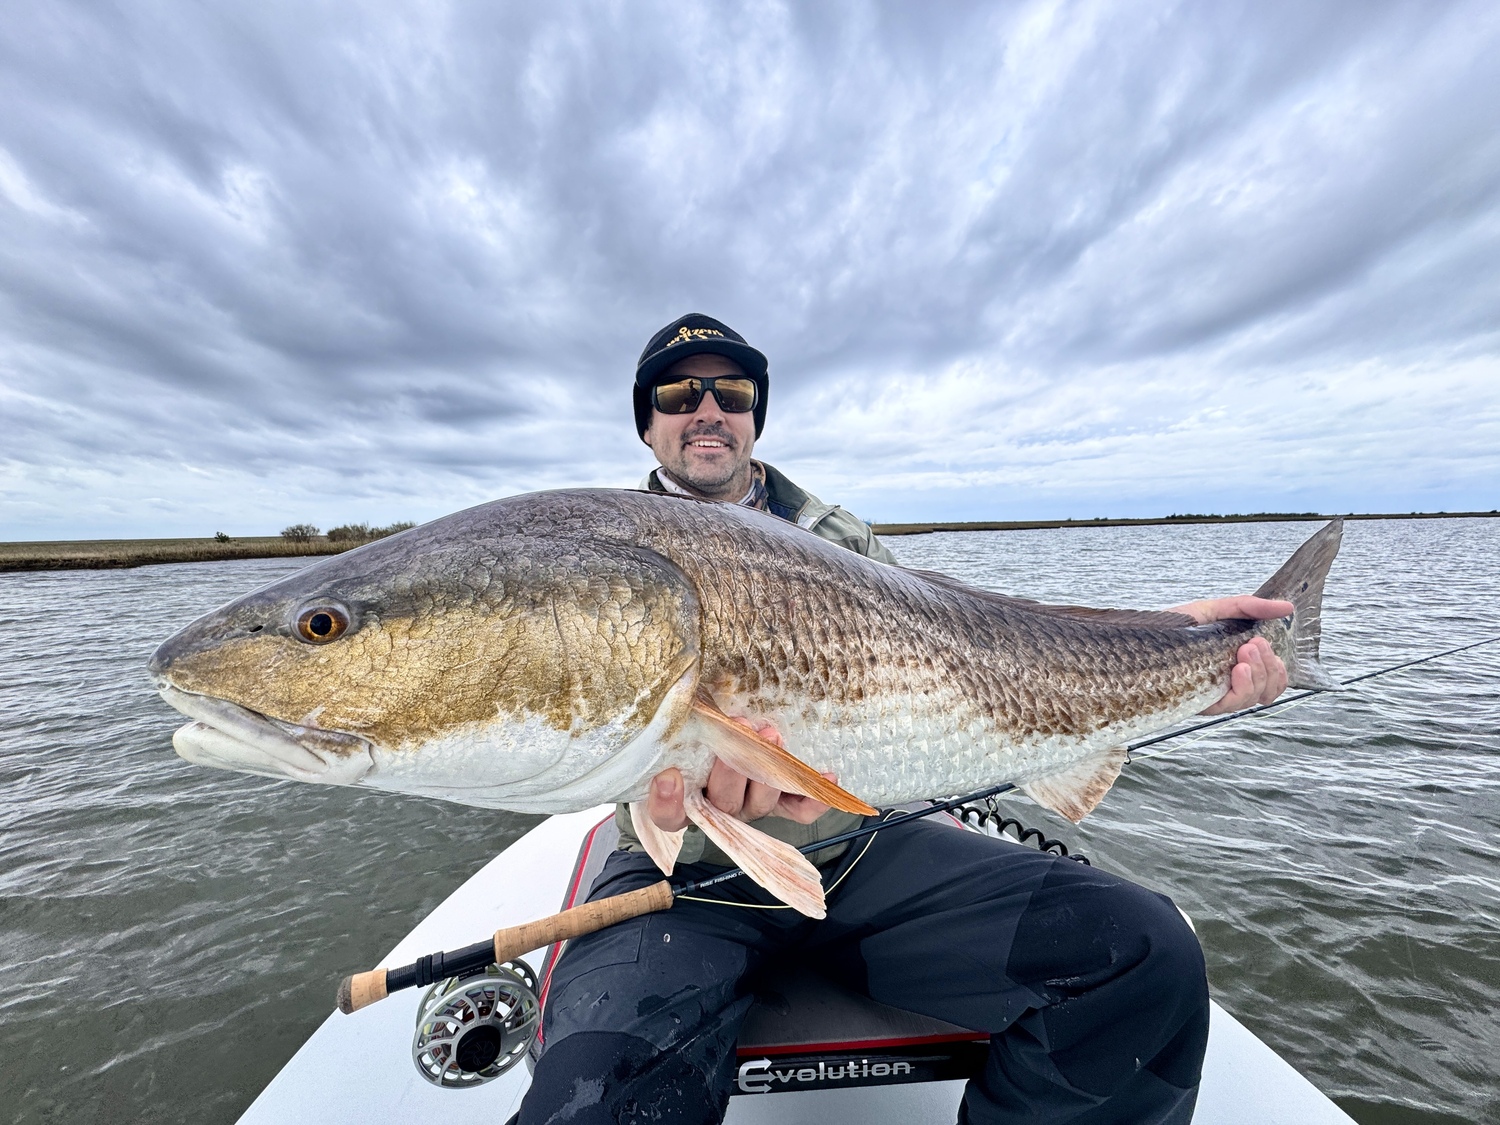 Steve Lobosco of Sag Harbor caught this beautiful redfish while visiting Louisiana in December, while casting a Sag Harbor-based Rise Fishing Co. fly rod. CAPT ADAM DEBRUIN